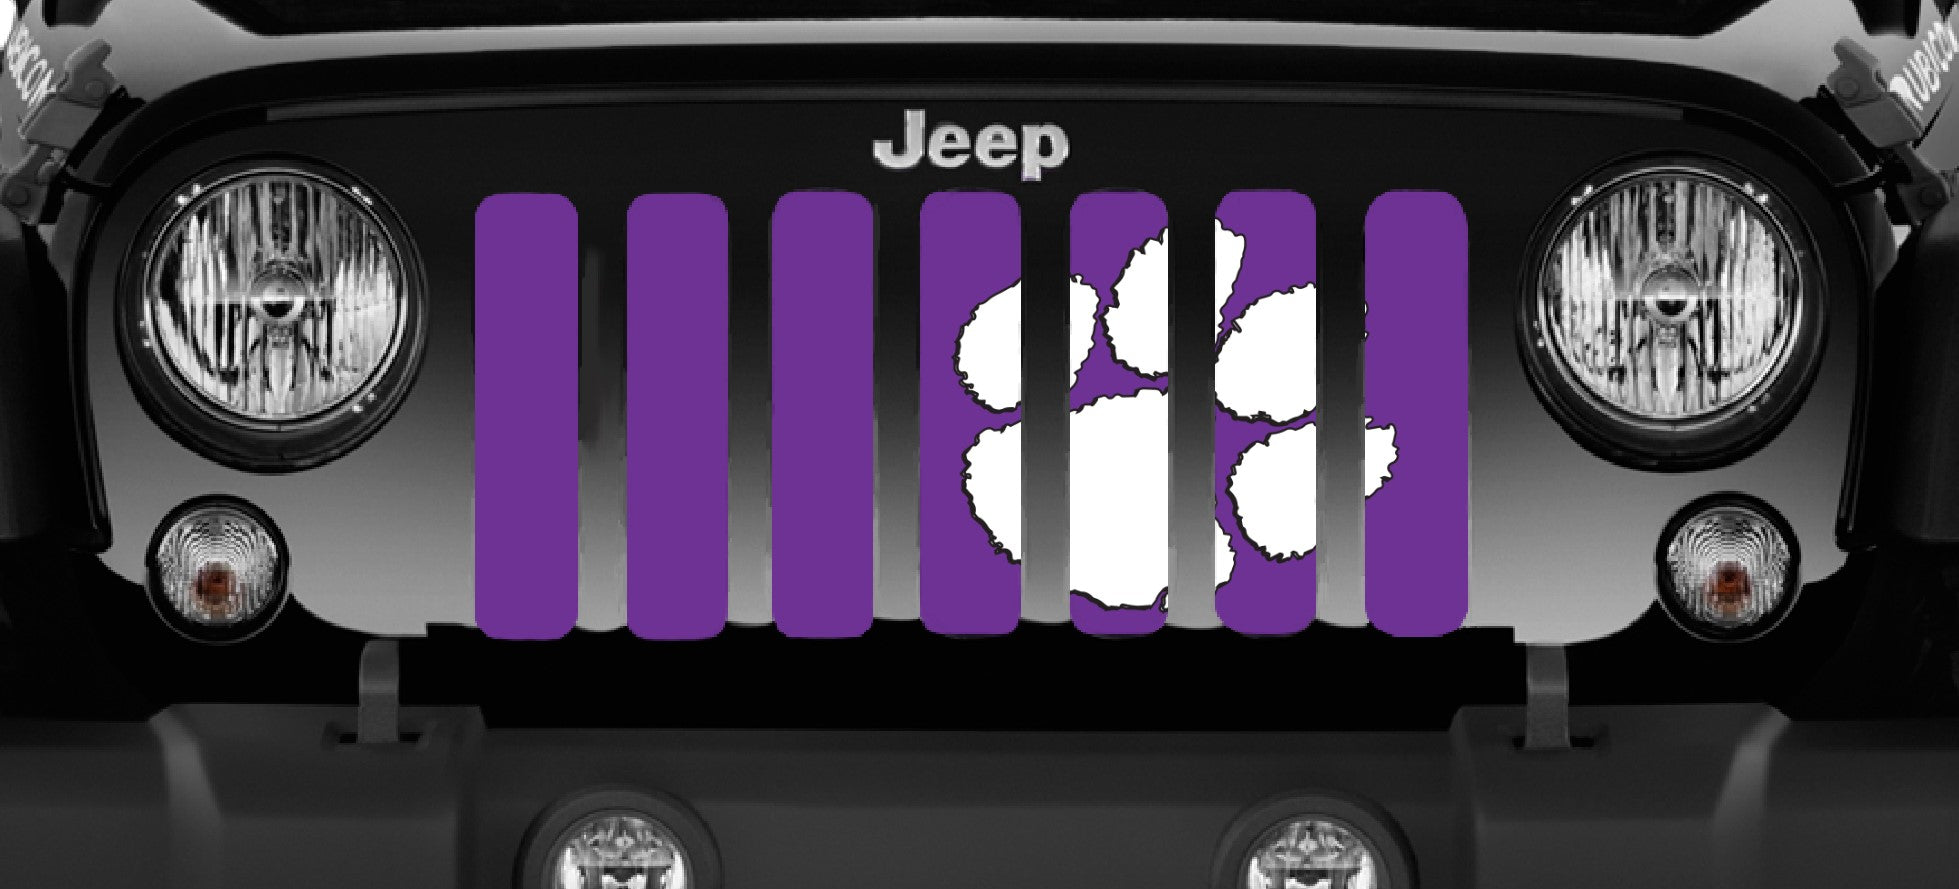 Jeep Wrangler White Tiger Paw on Purple Grille Insert | Dirty Acres